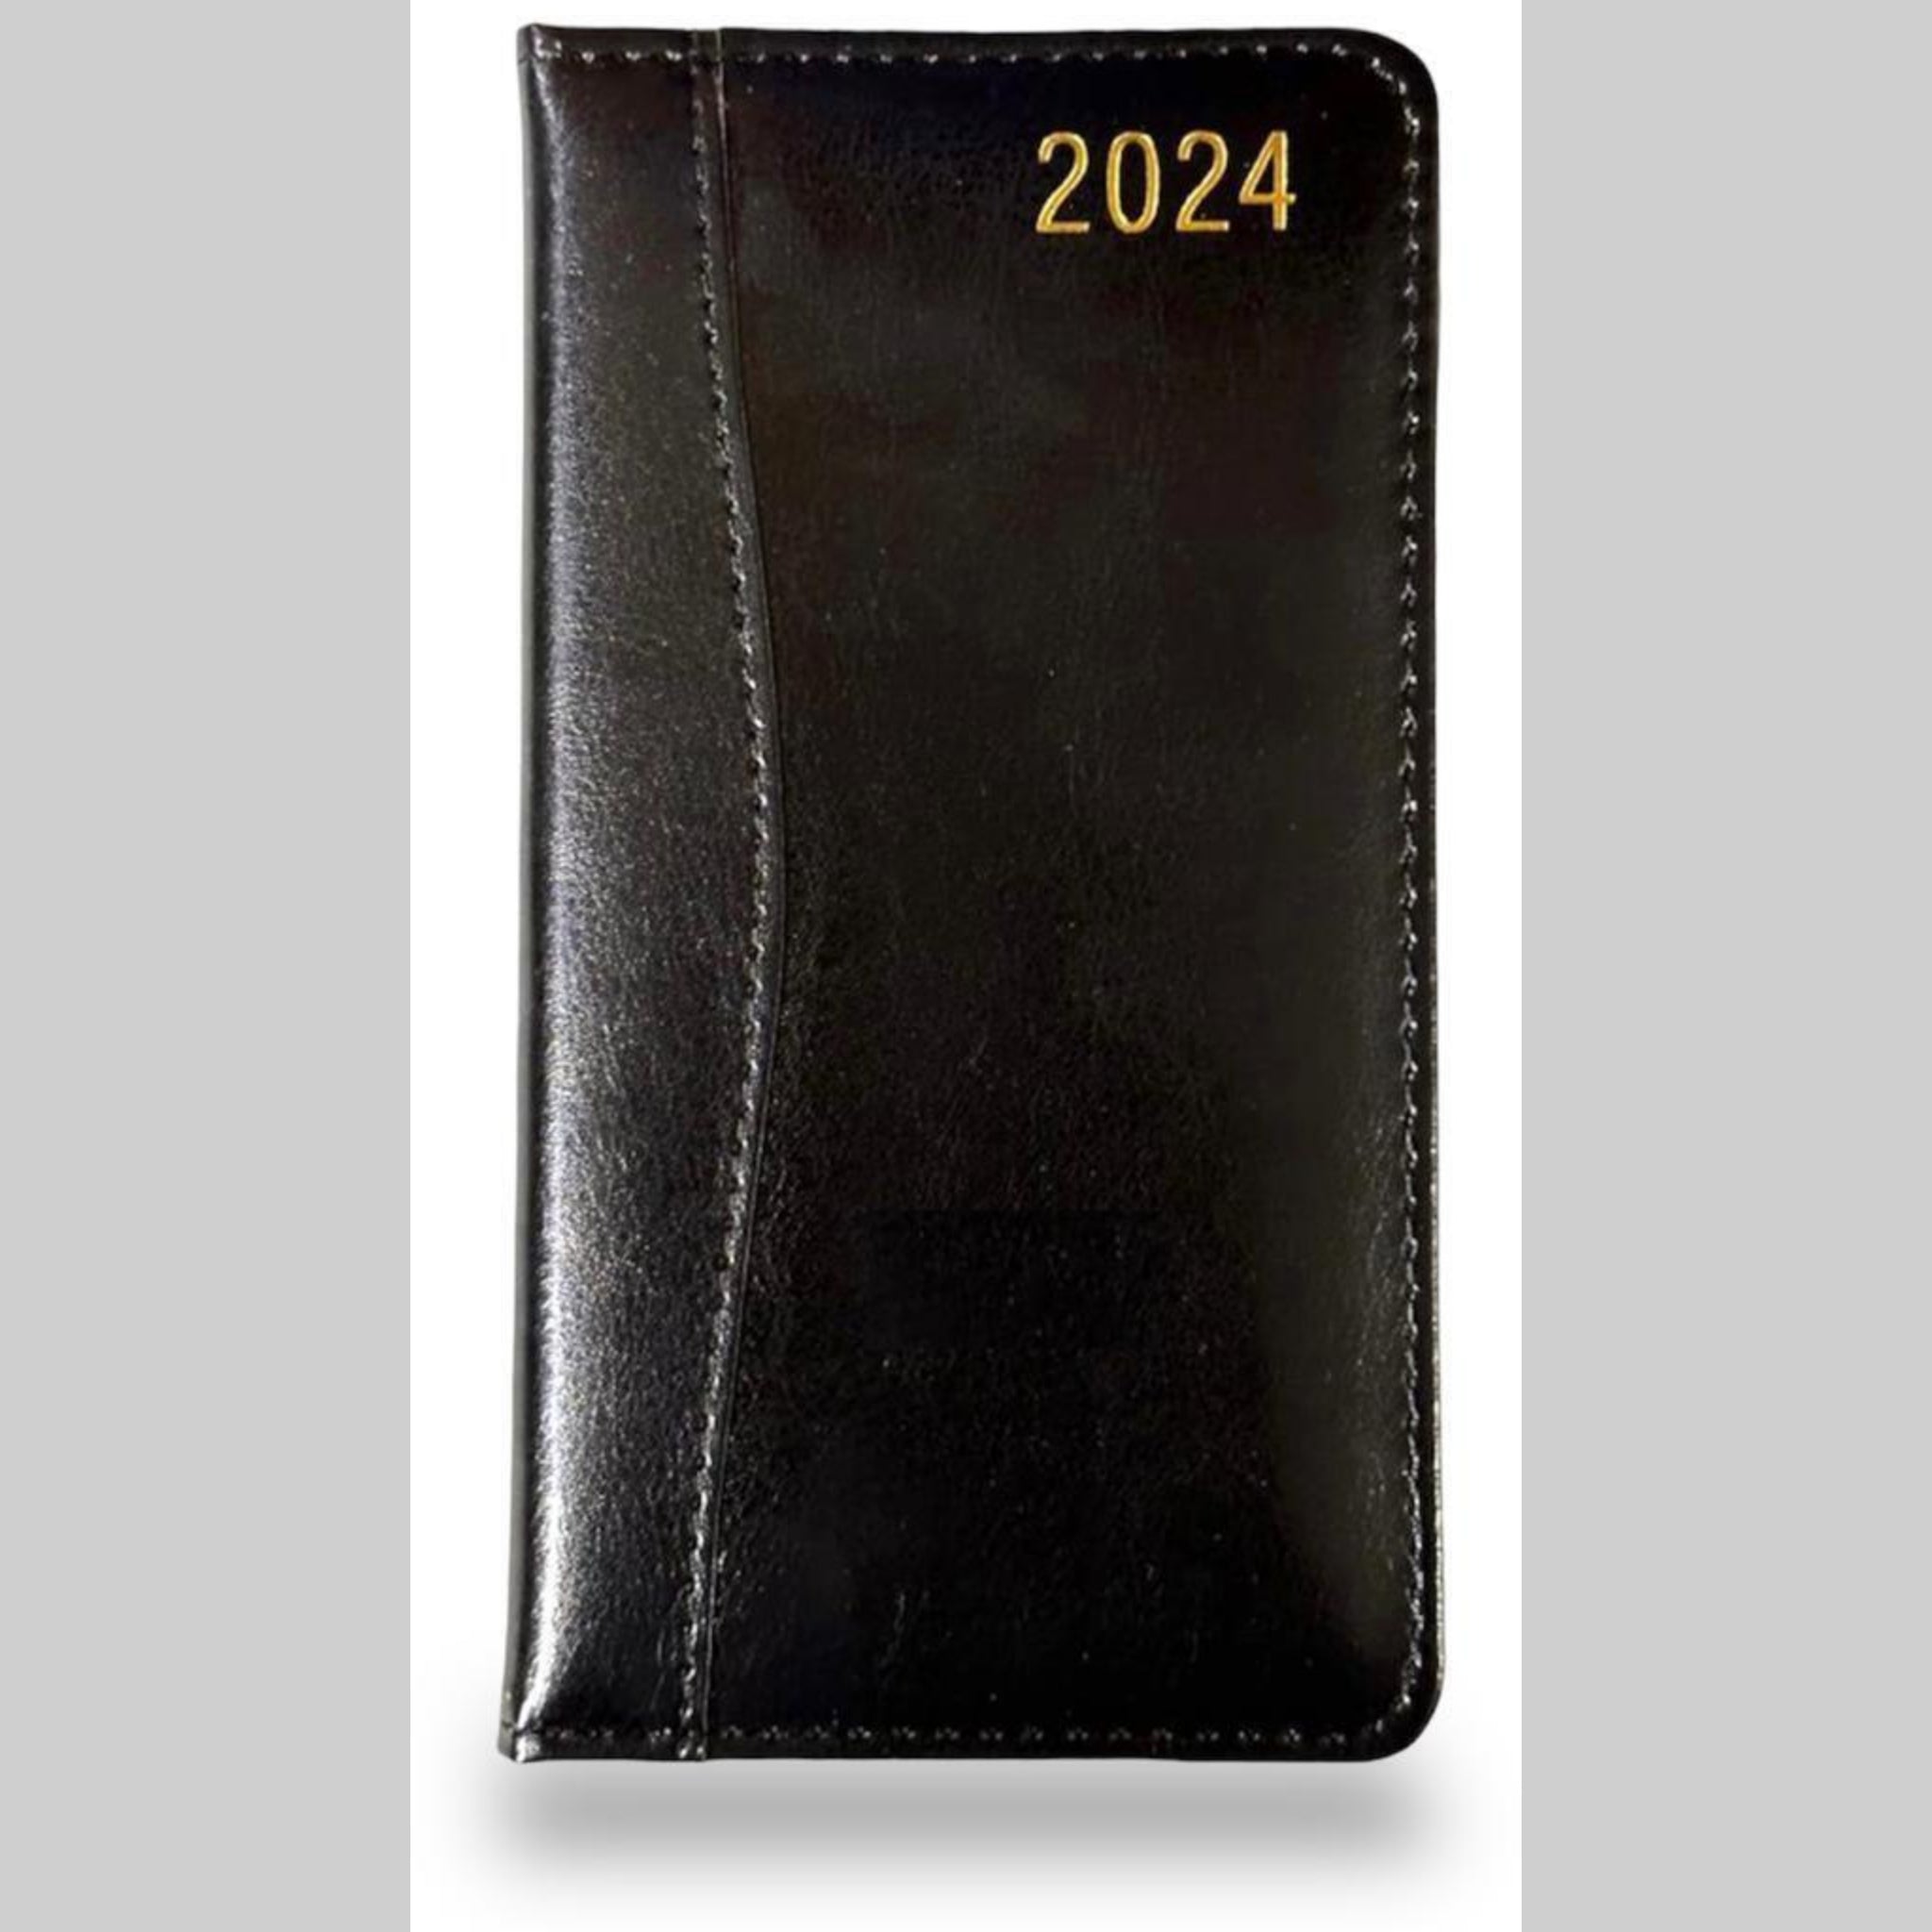 Beclen Harp 2024 Slim Week To View/WTV D-Range Executive Luxury Personalized Diary With Soft Leather Cover